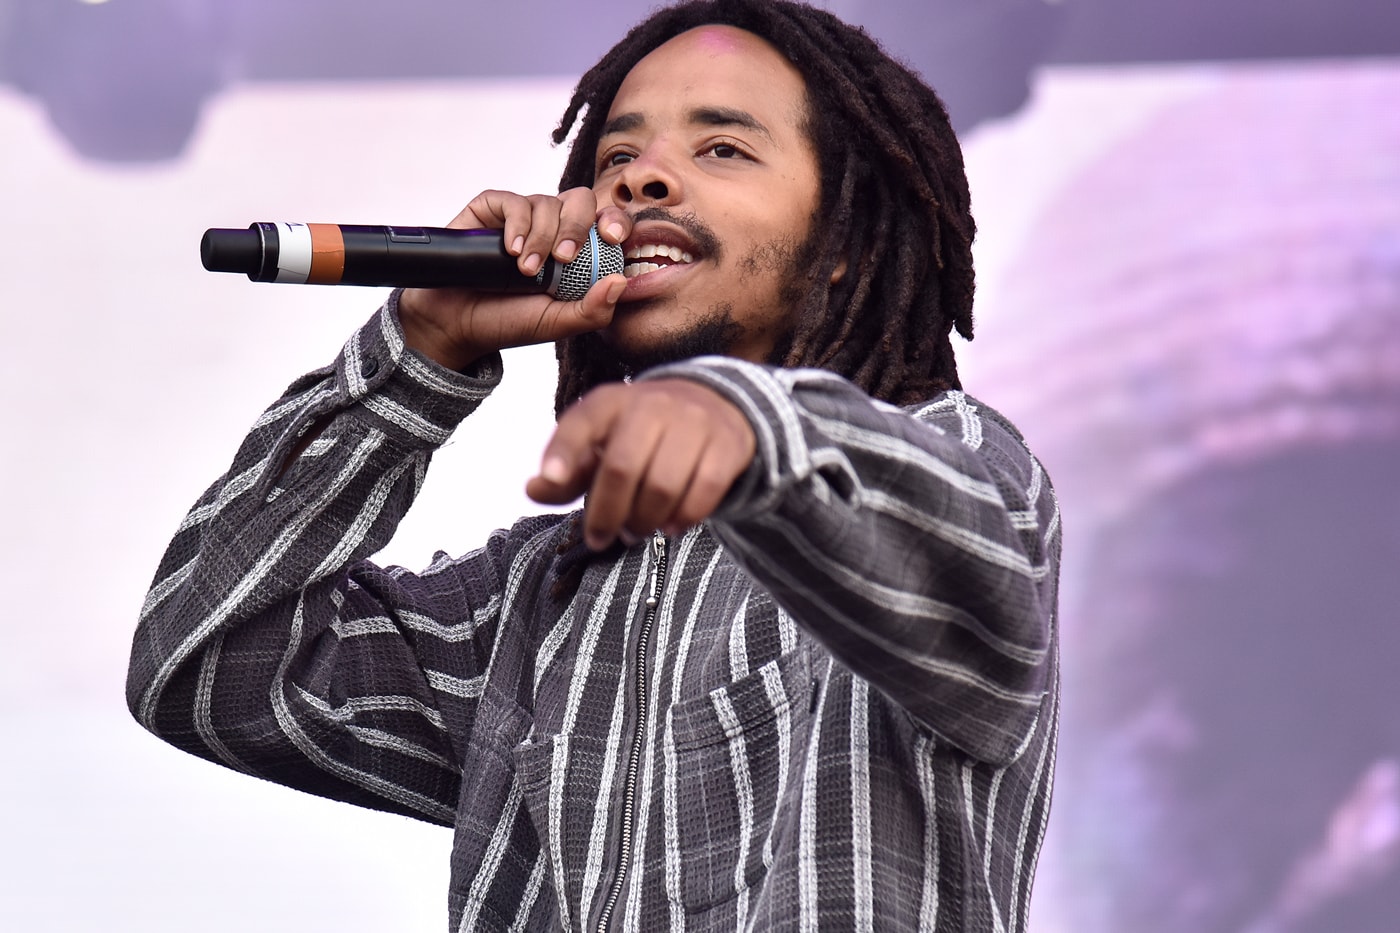 earl sweatshirt some rap songs tracklist features collabs collaborations 2018 november release date info details music new navy blue standing on the corner cheryl harris Keorapetse Kgositsile album project